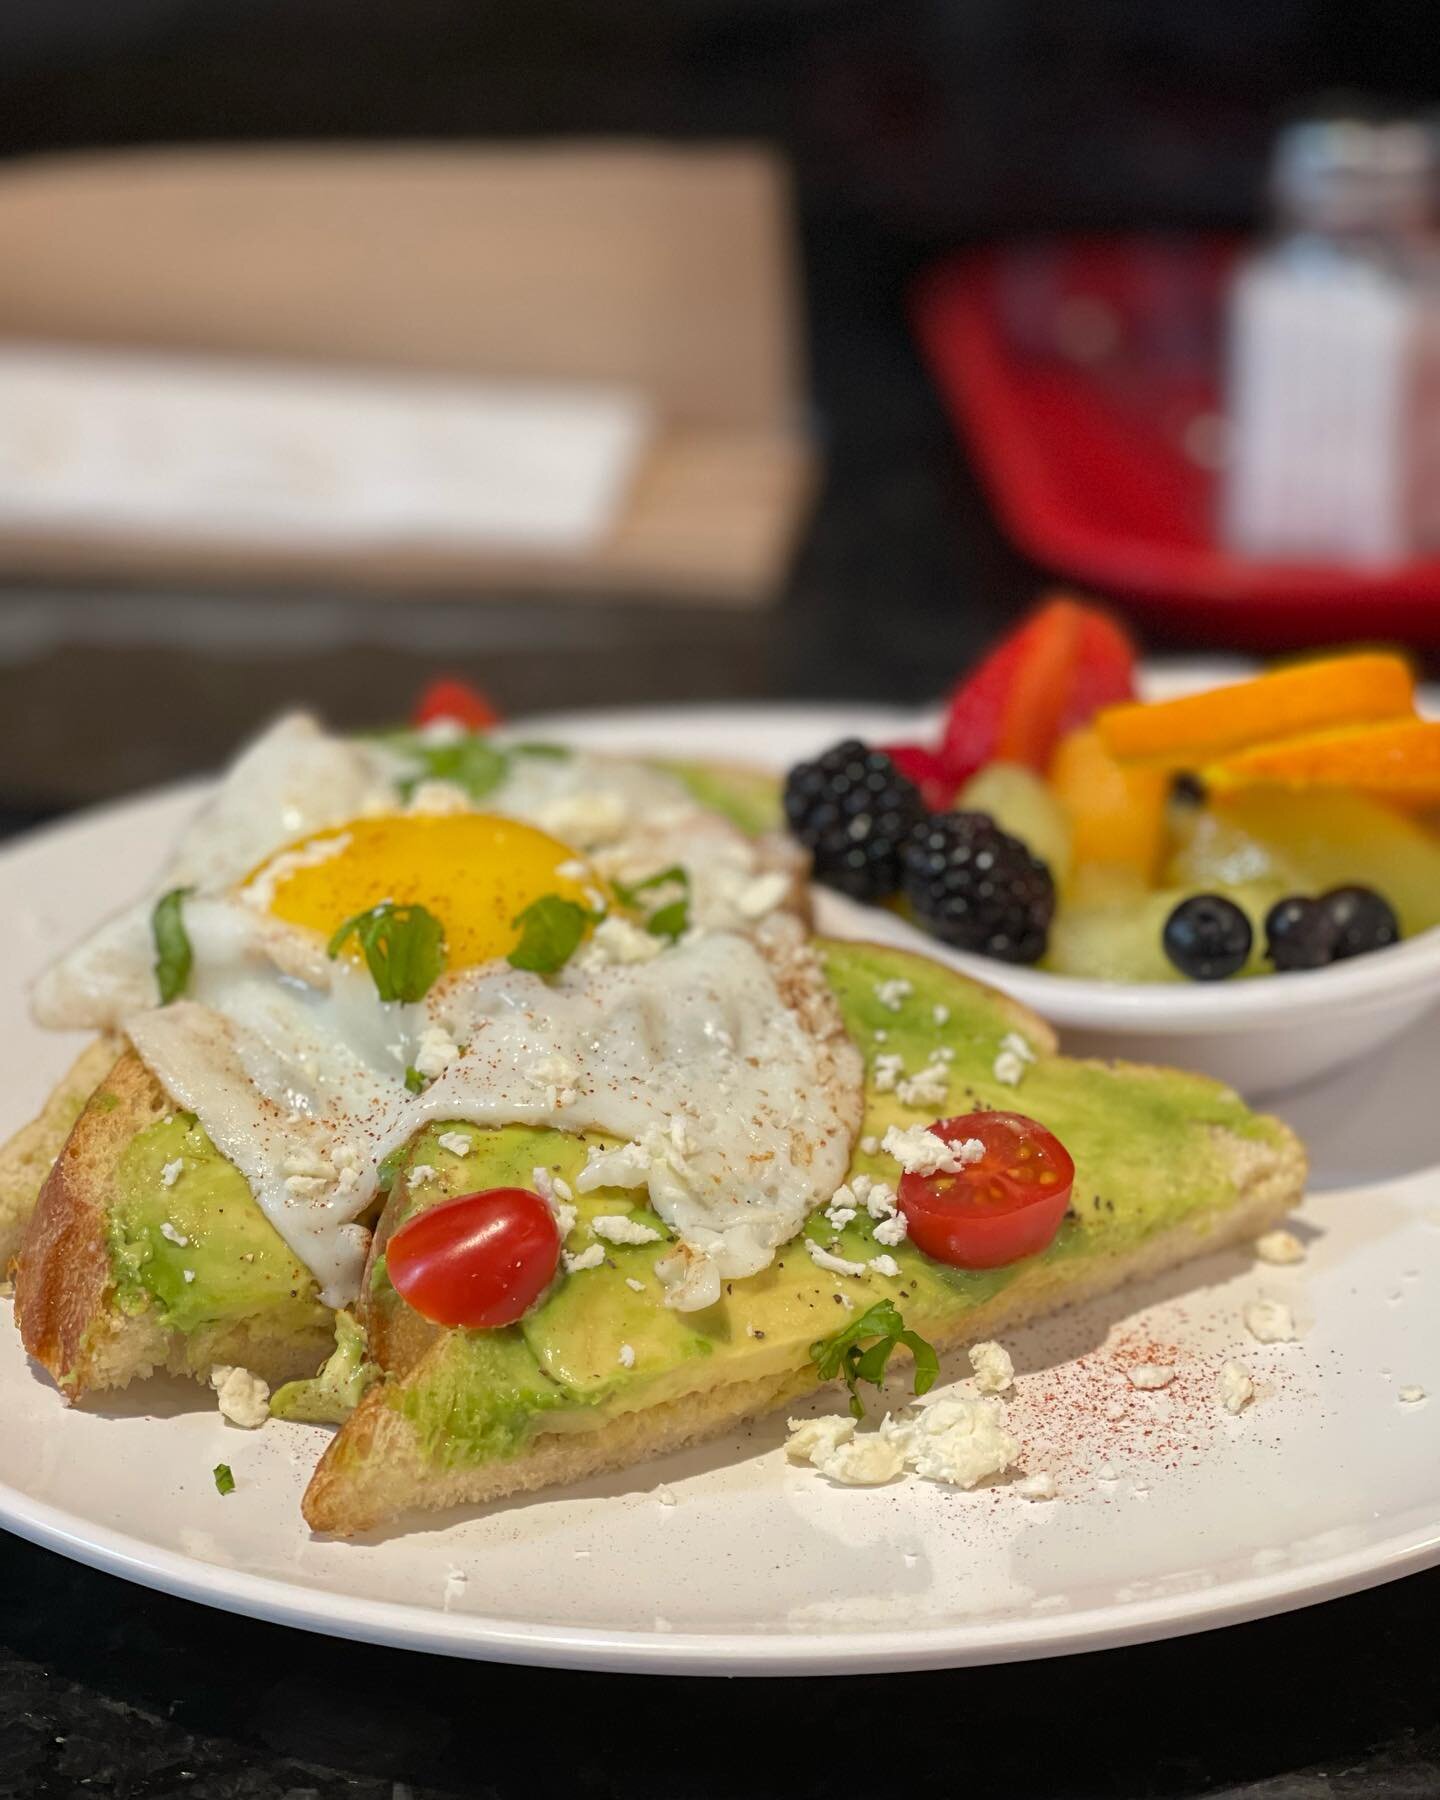 🤩 Avocado Toast 🥑 🍳 fresh daily picked avocado with your favorite bread, sunny egg on top with cherry tomato, fresh basil,and feta cheese, served with a  fresh fruit cup and your favorite house coffee ☕️ or Orange juice 🥤 #keemacafe #oldtownsandi